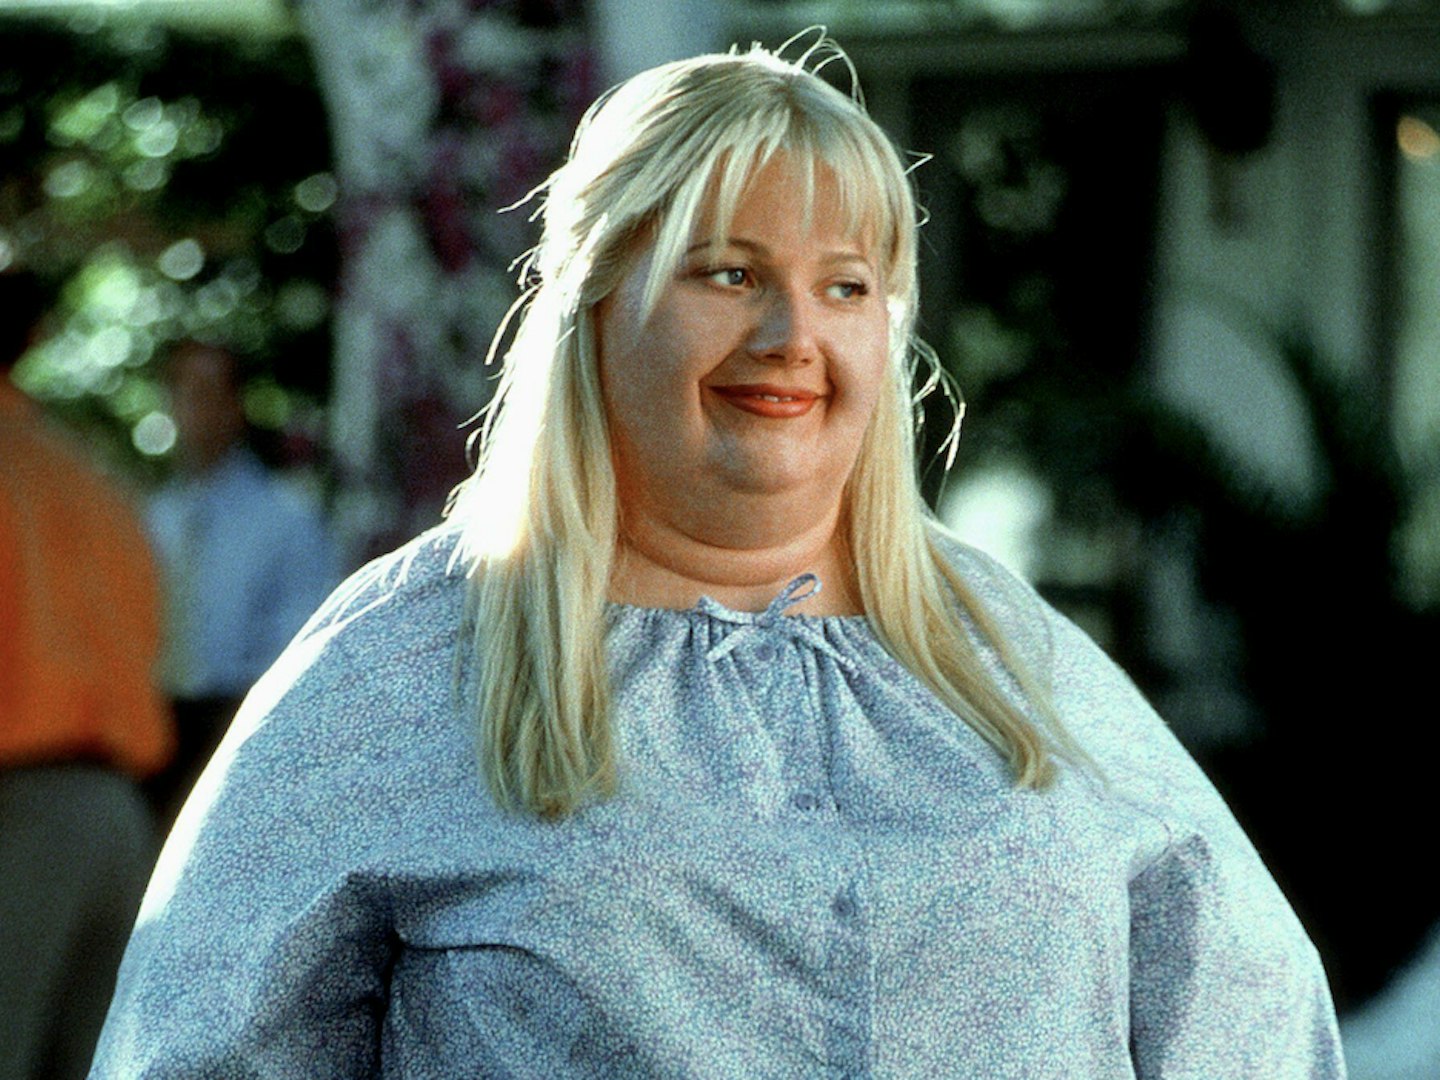 Gwyneth Paltrow's Shallow Hal Body Double Developed An Eating Disorder